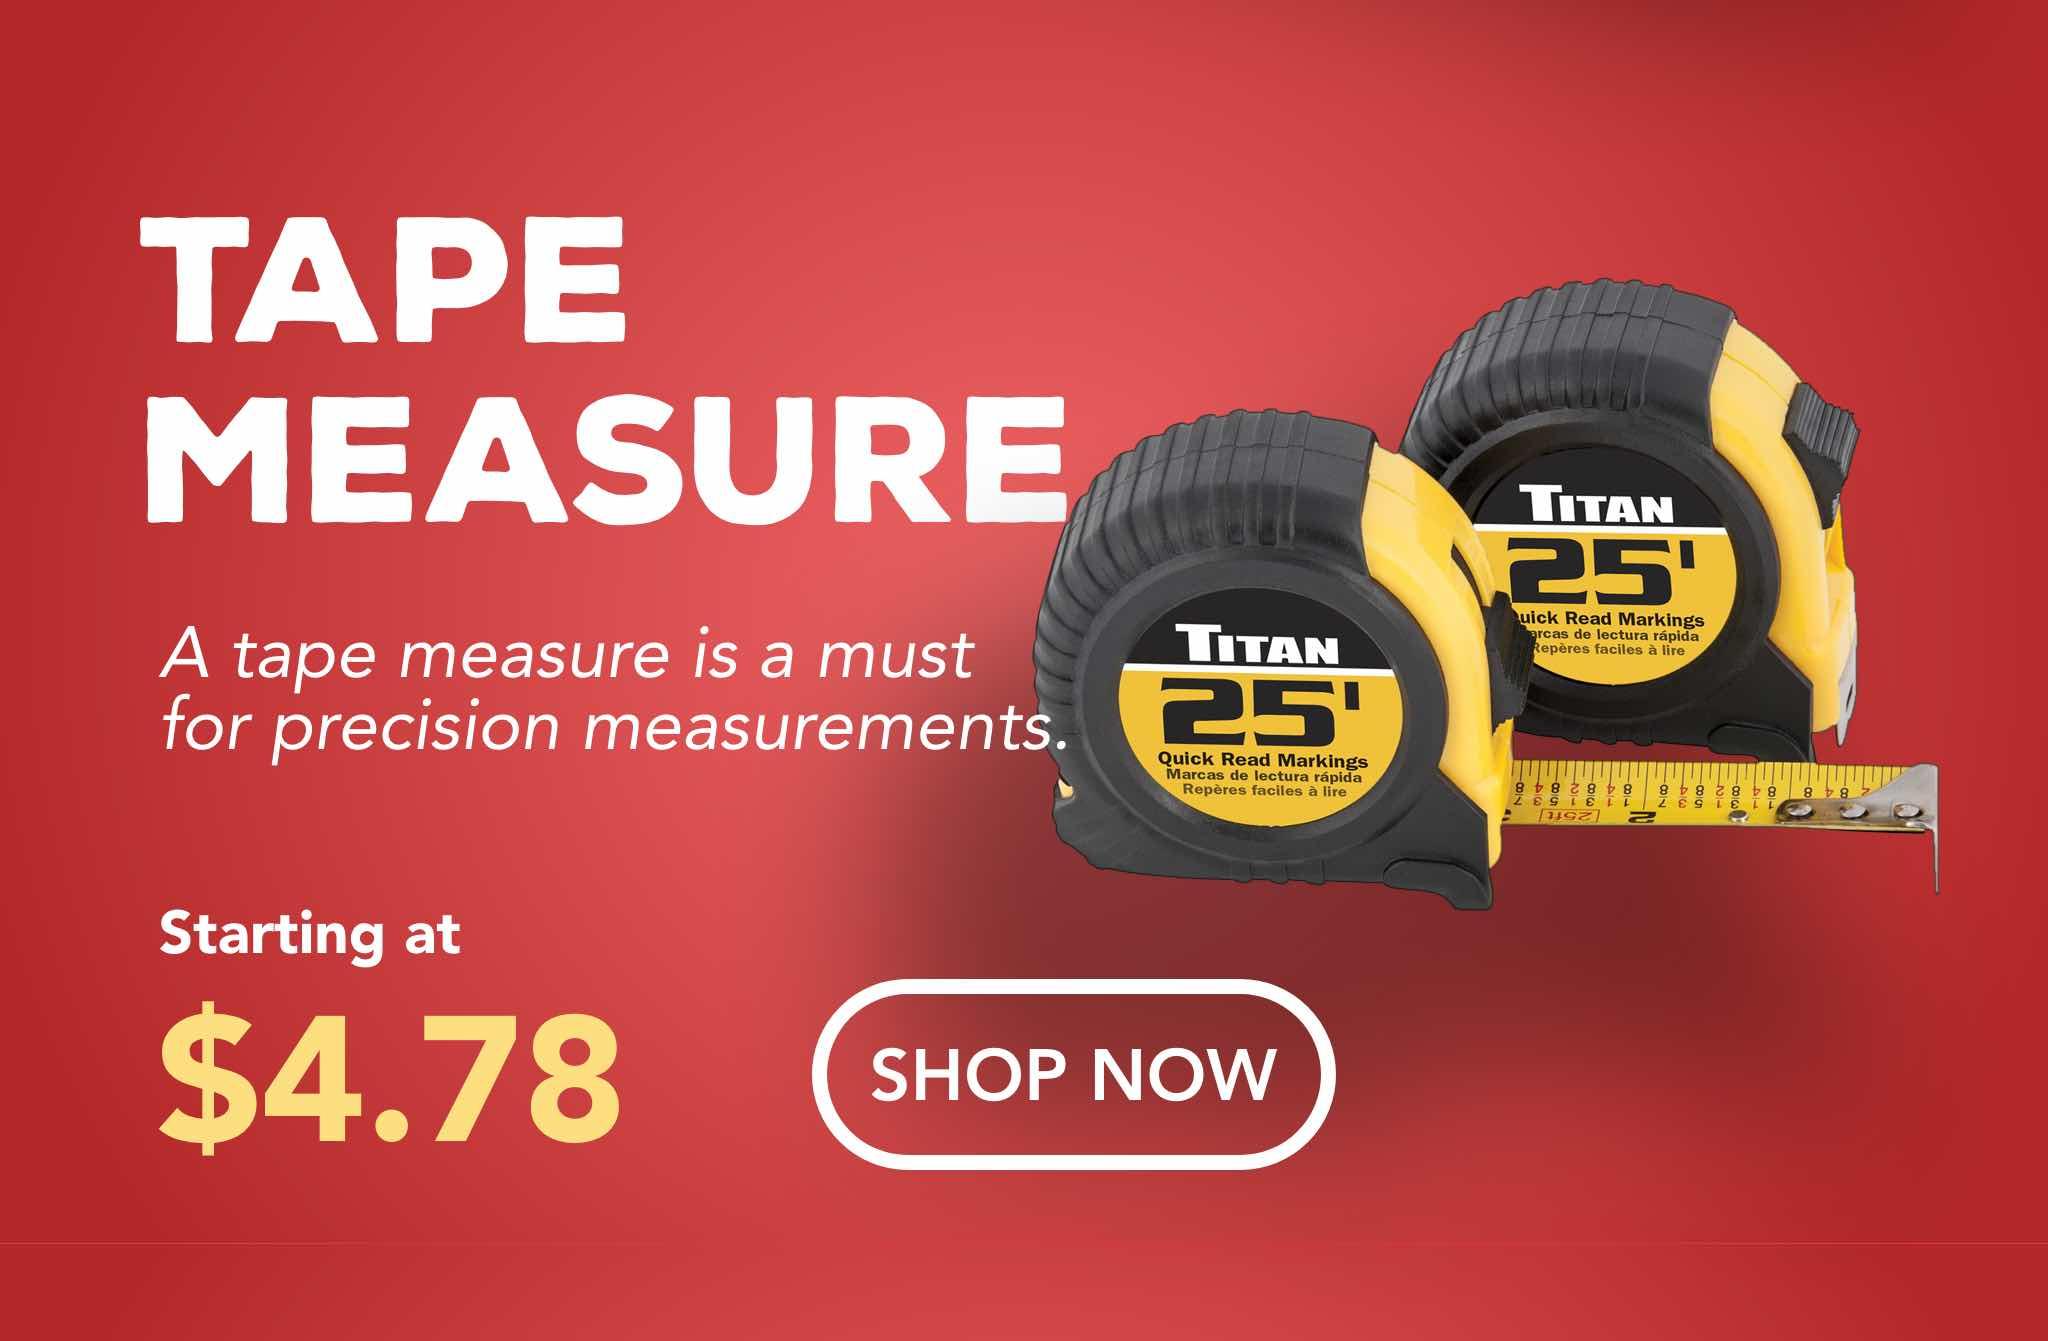 A tape measure is a must for precision measurements.